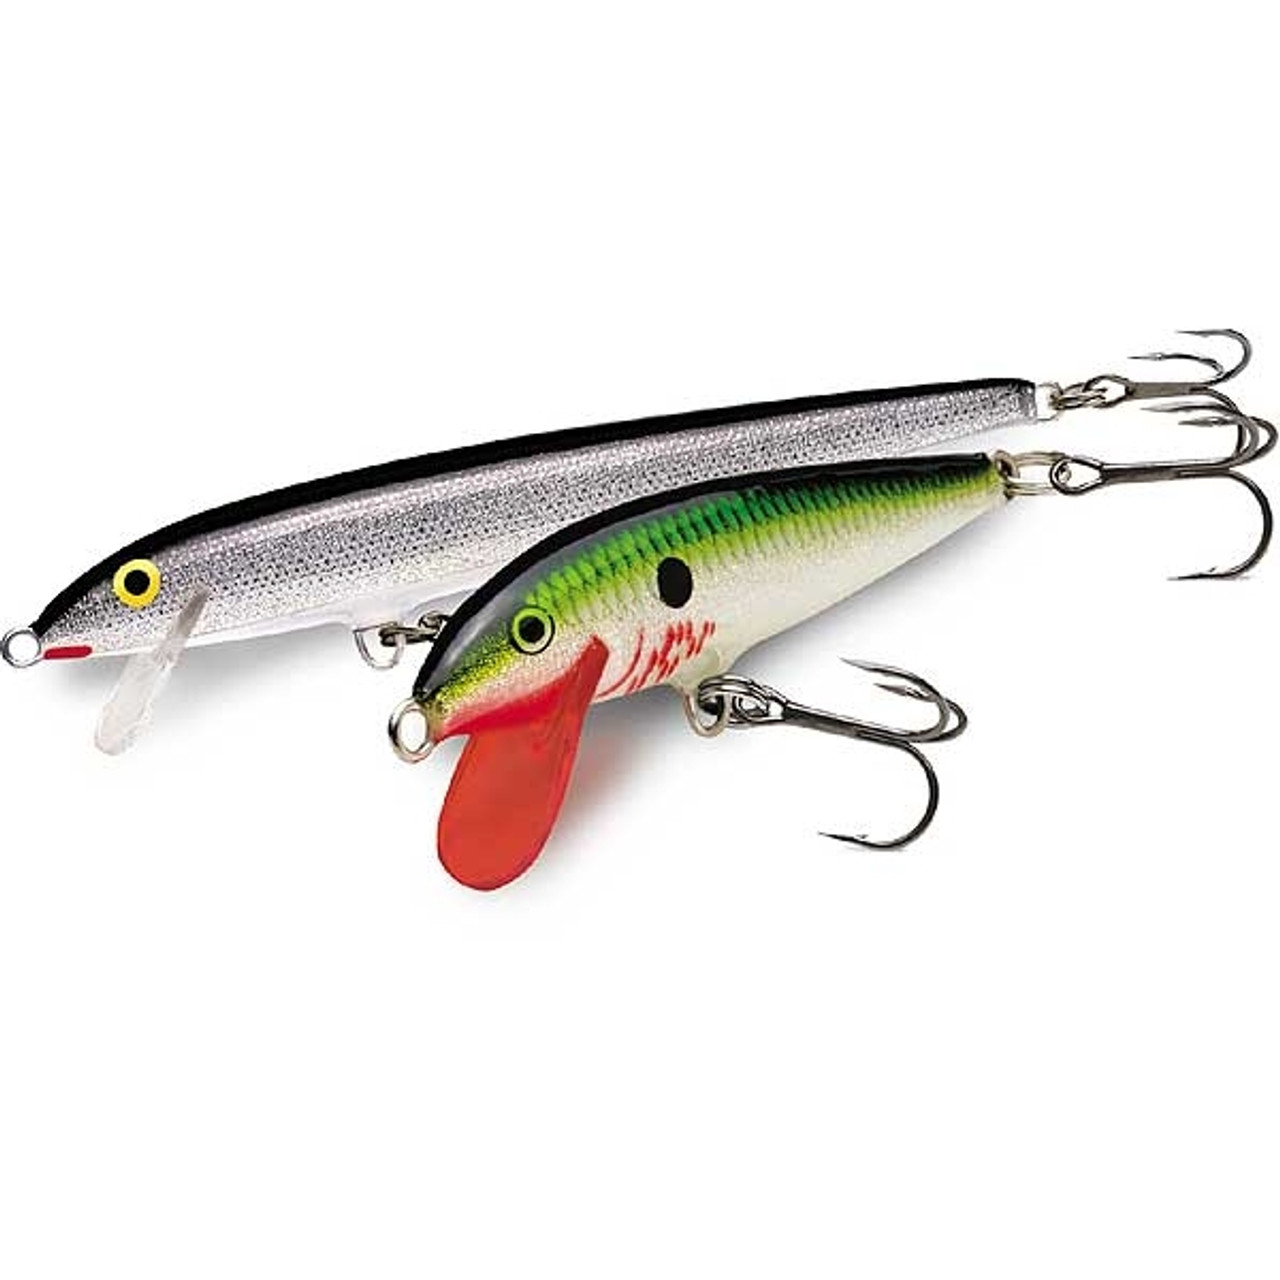 Rapala Original Floater 5 Brown Trout Fishing Lure